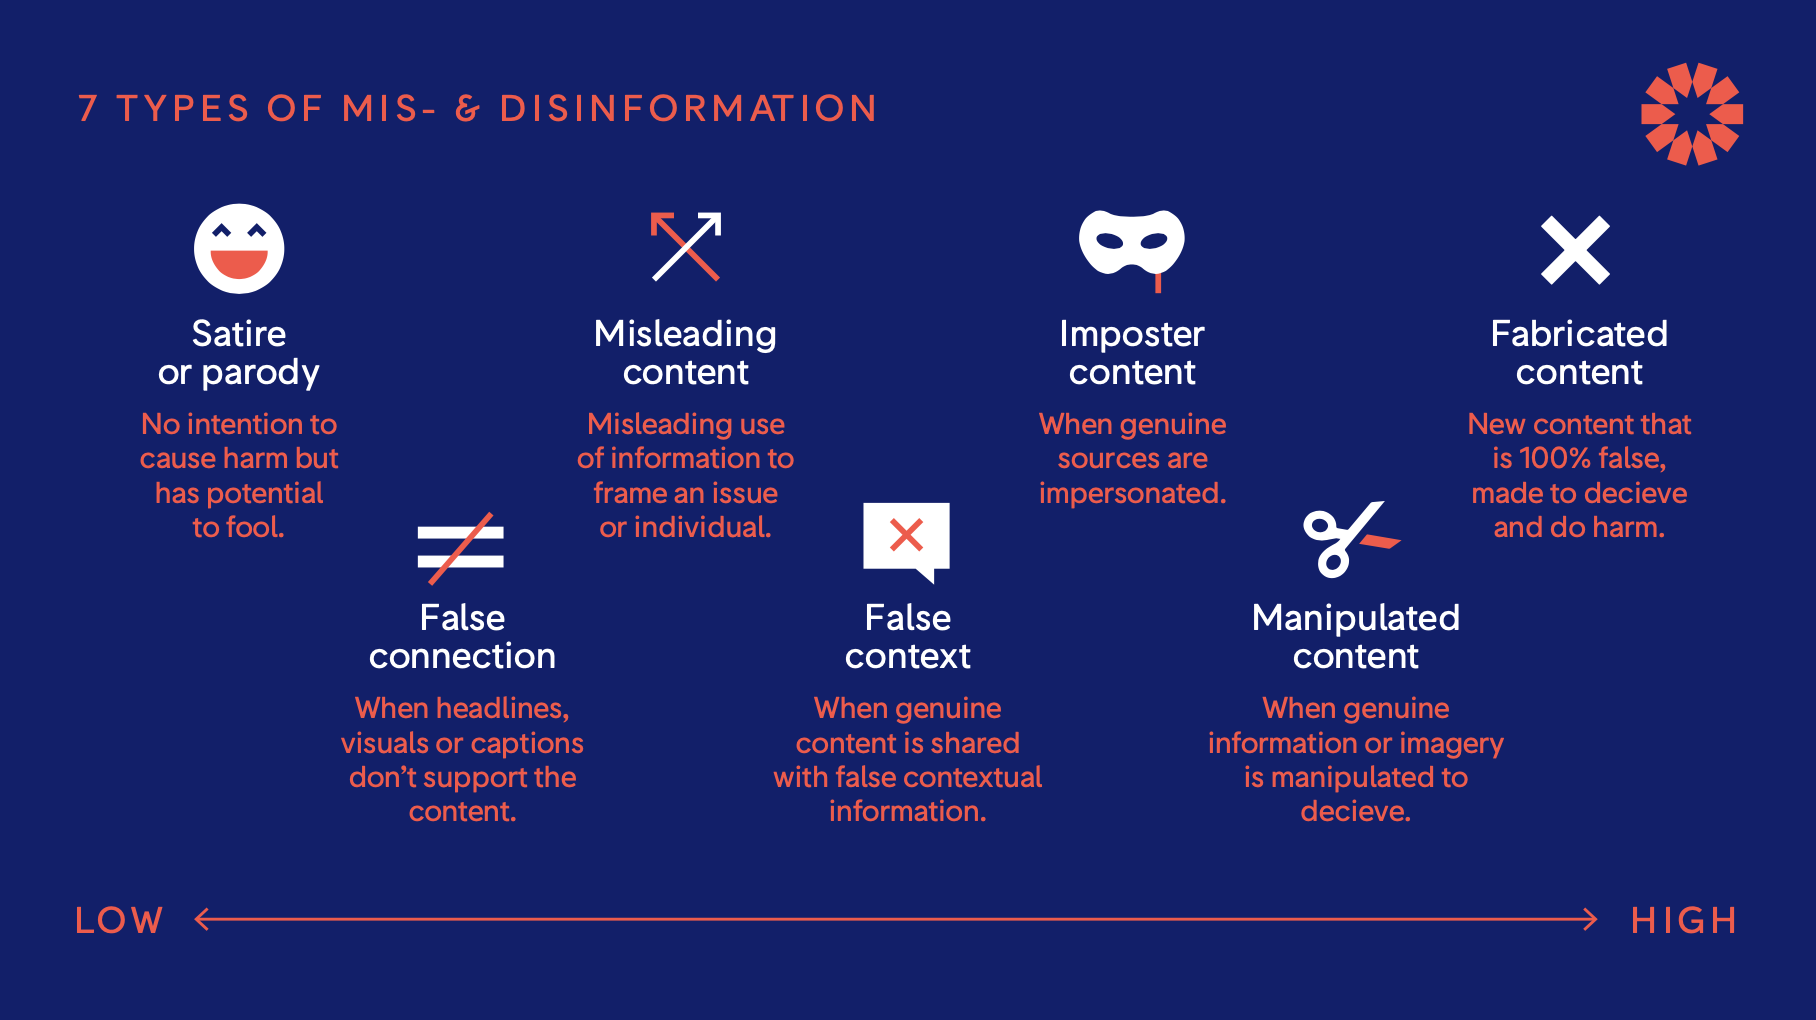 7 types of disinformation and misinformation